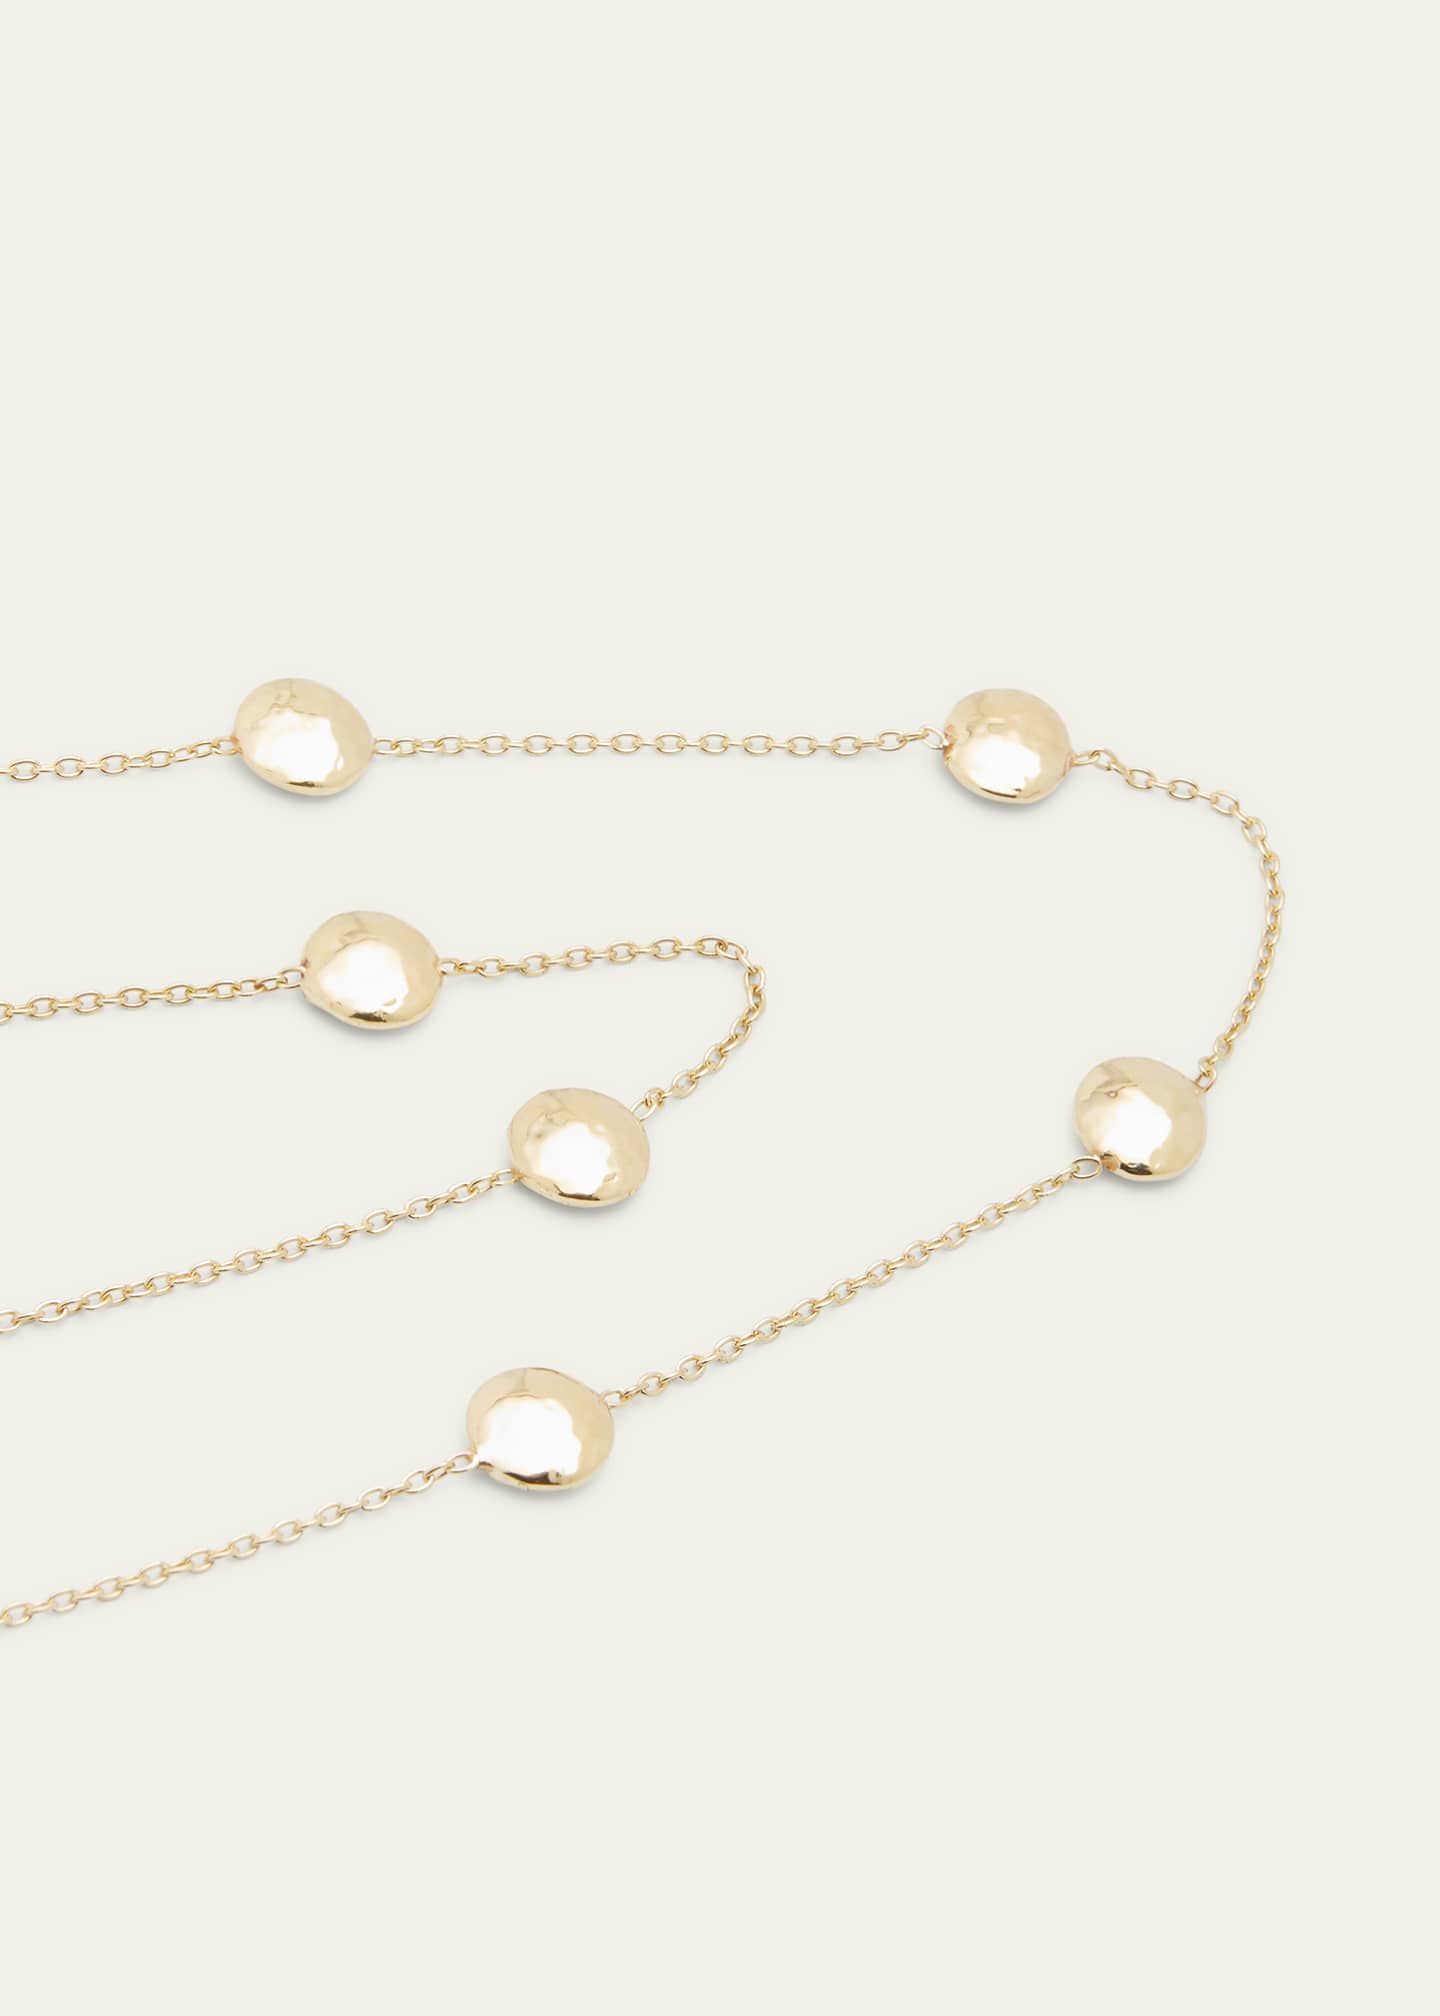 Ippolita Long Hammered Pinball Layering Necklace in 18K Gold Image 3 of 4